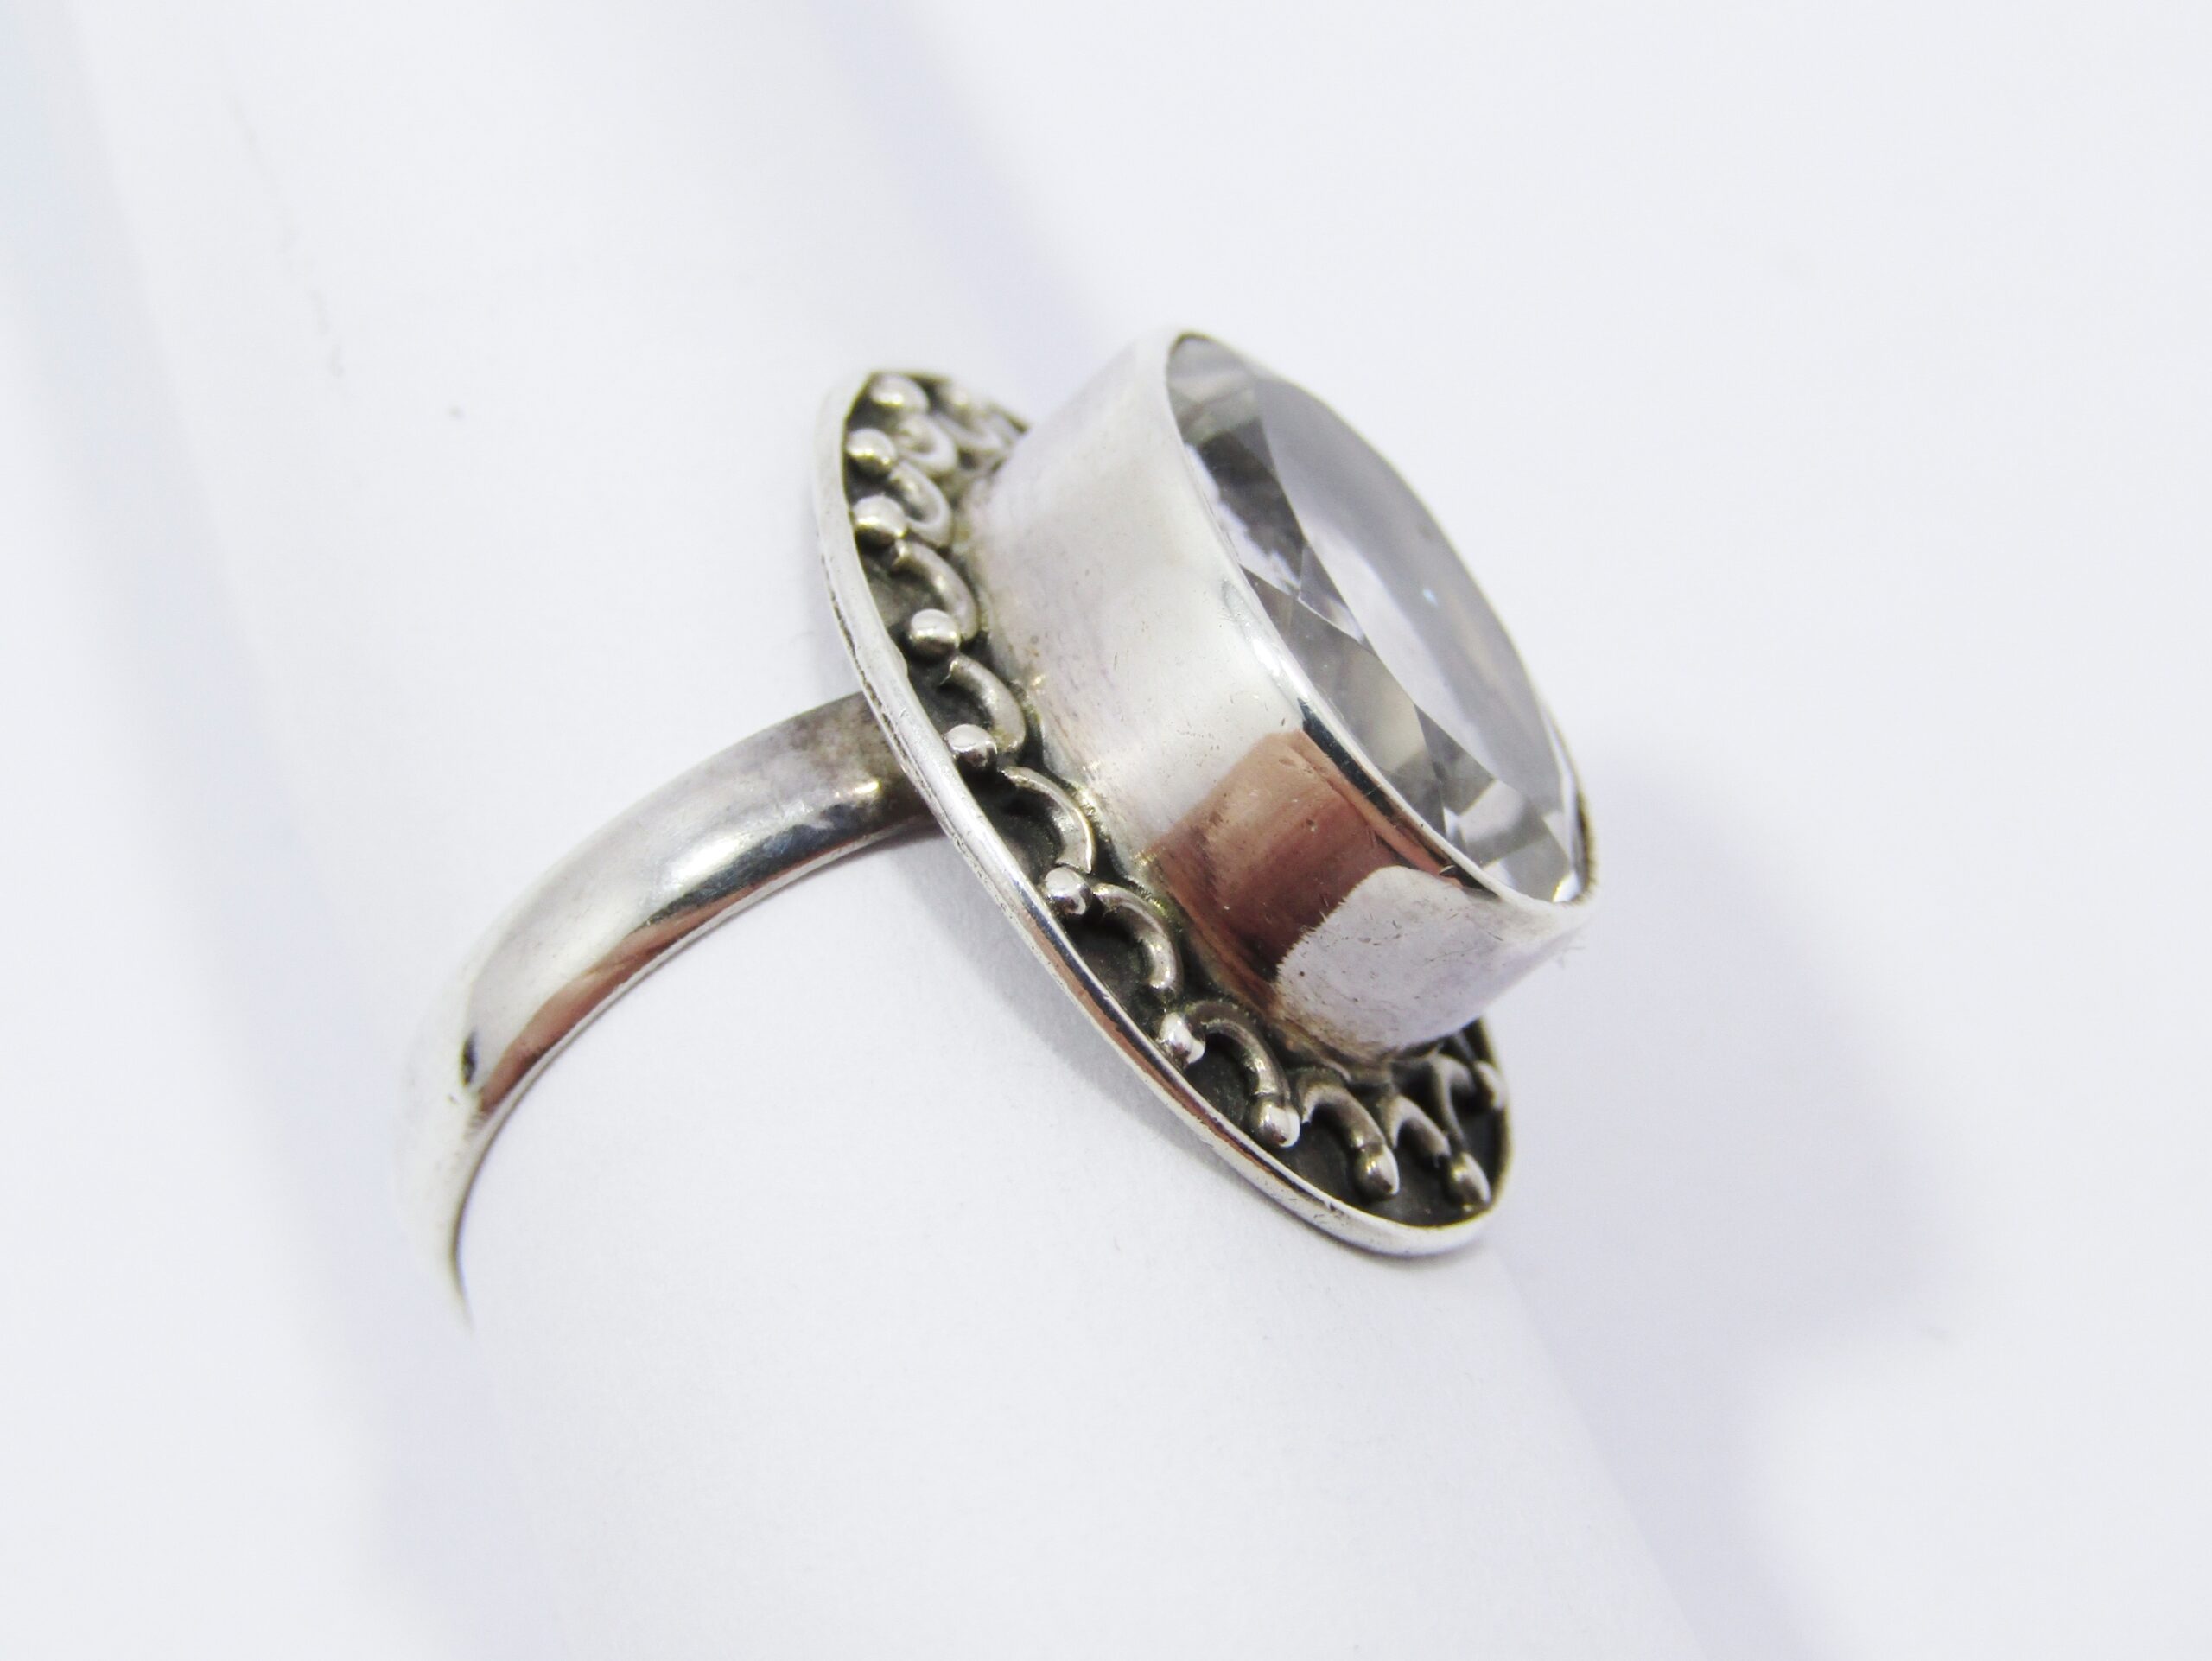 A Lovely Clear Quartz Bohemian Style Ring in Sterling Silver.